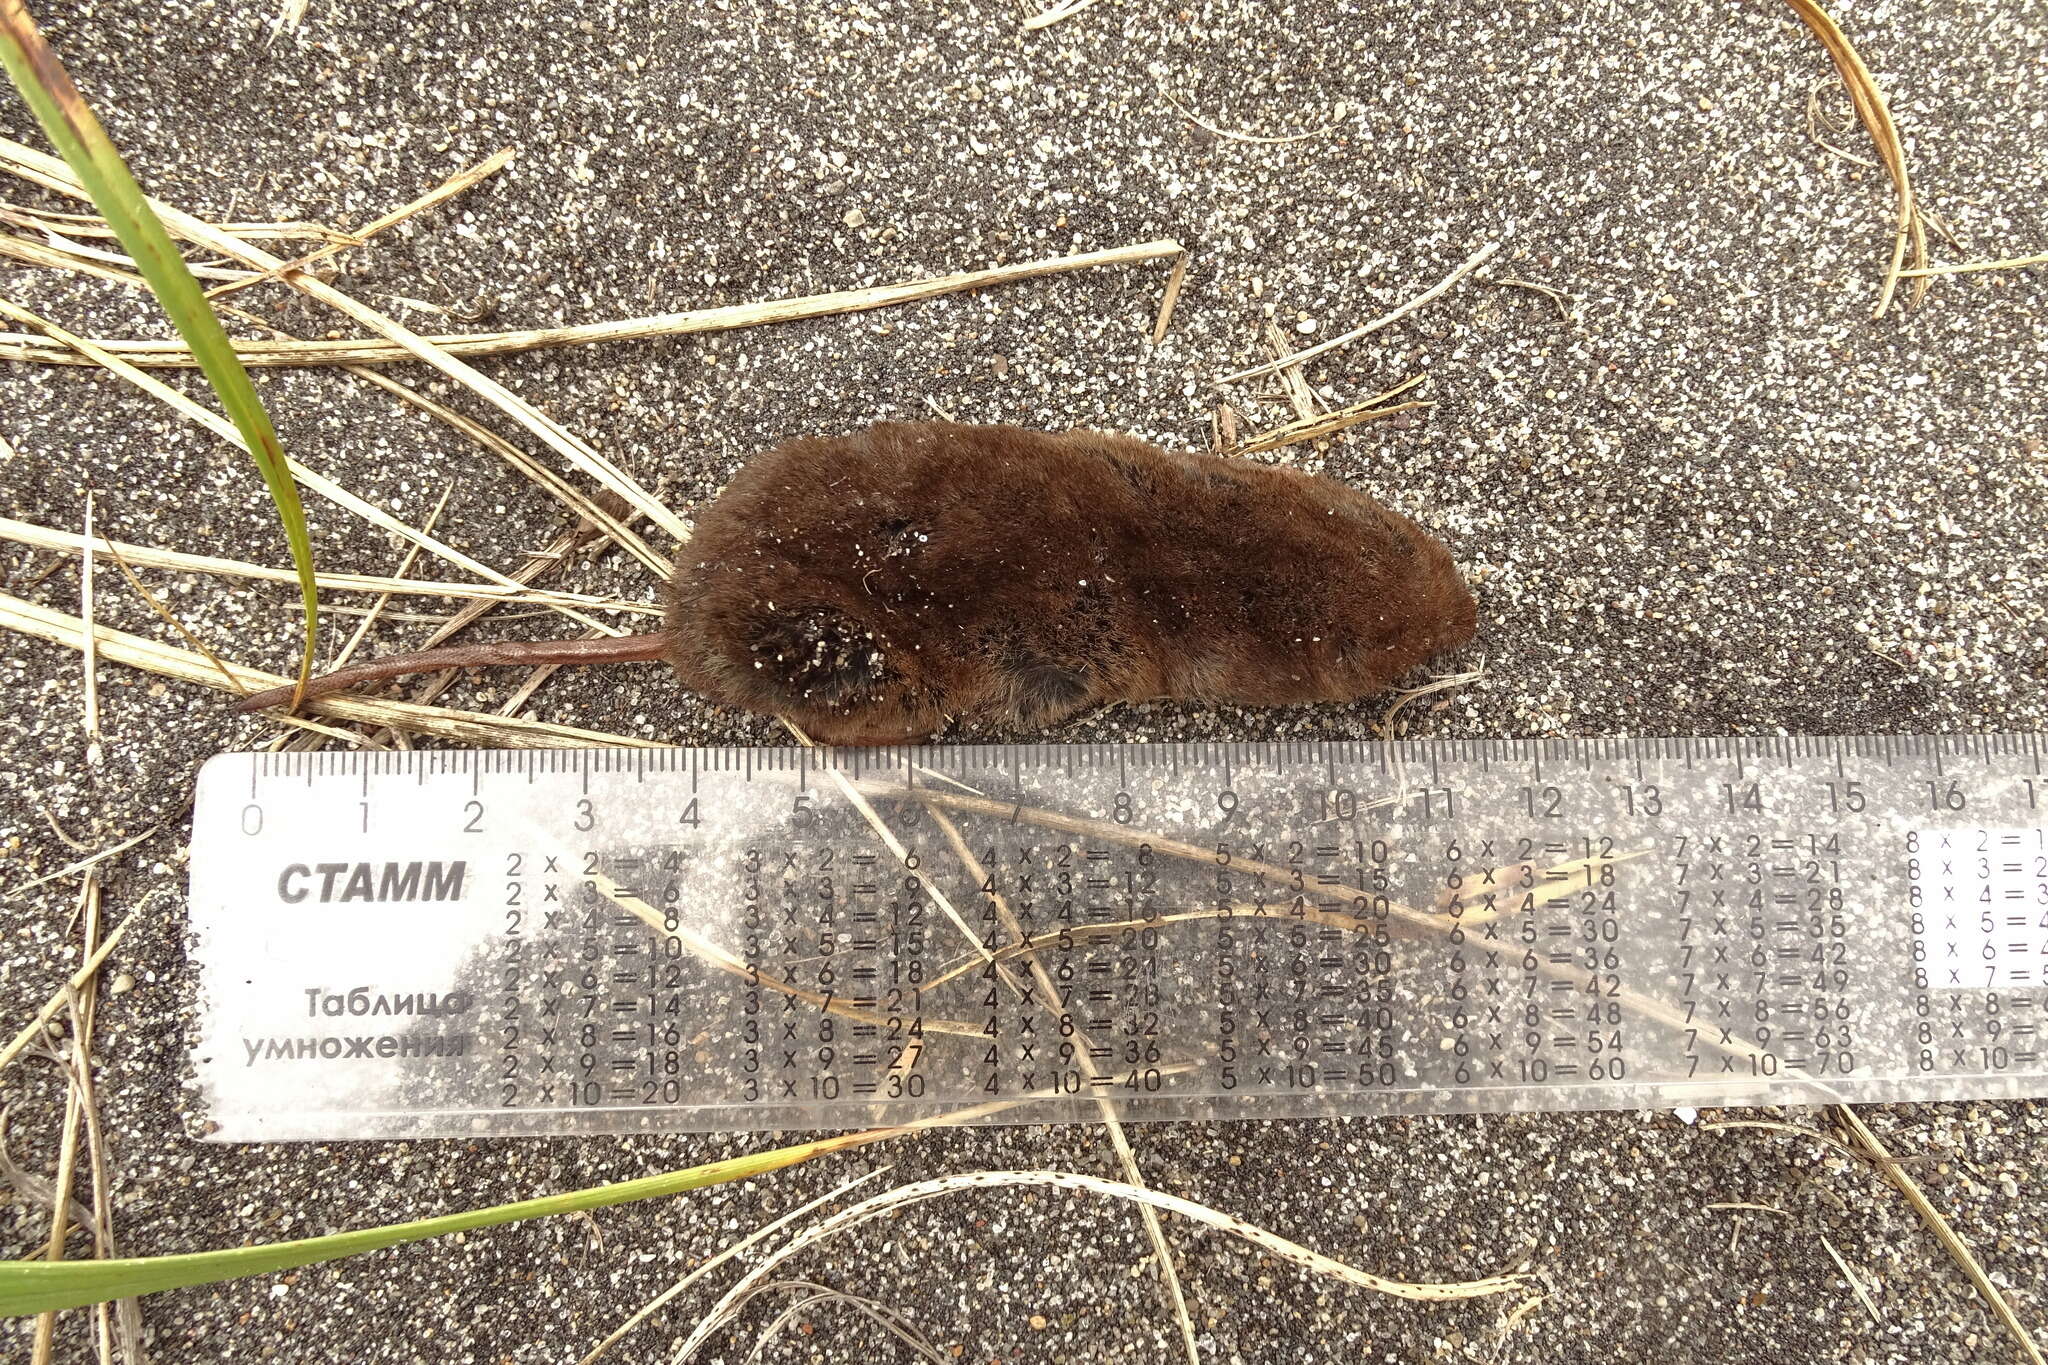 Image of Long-clawed Shrew